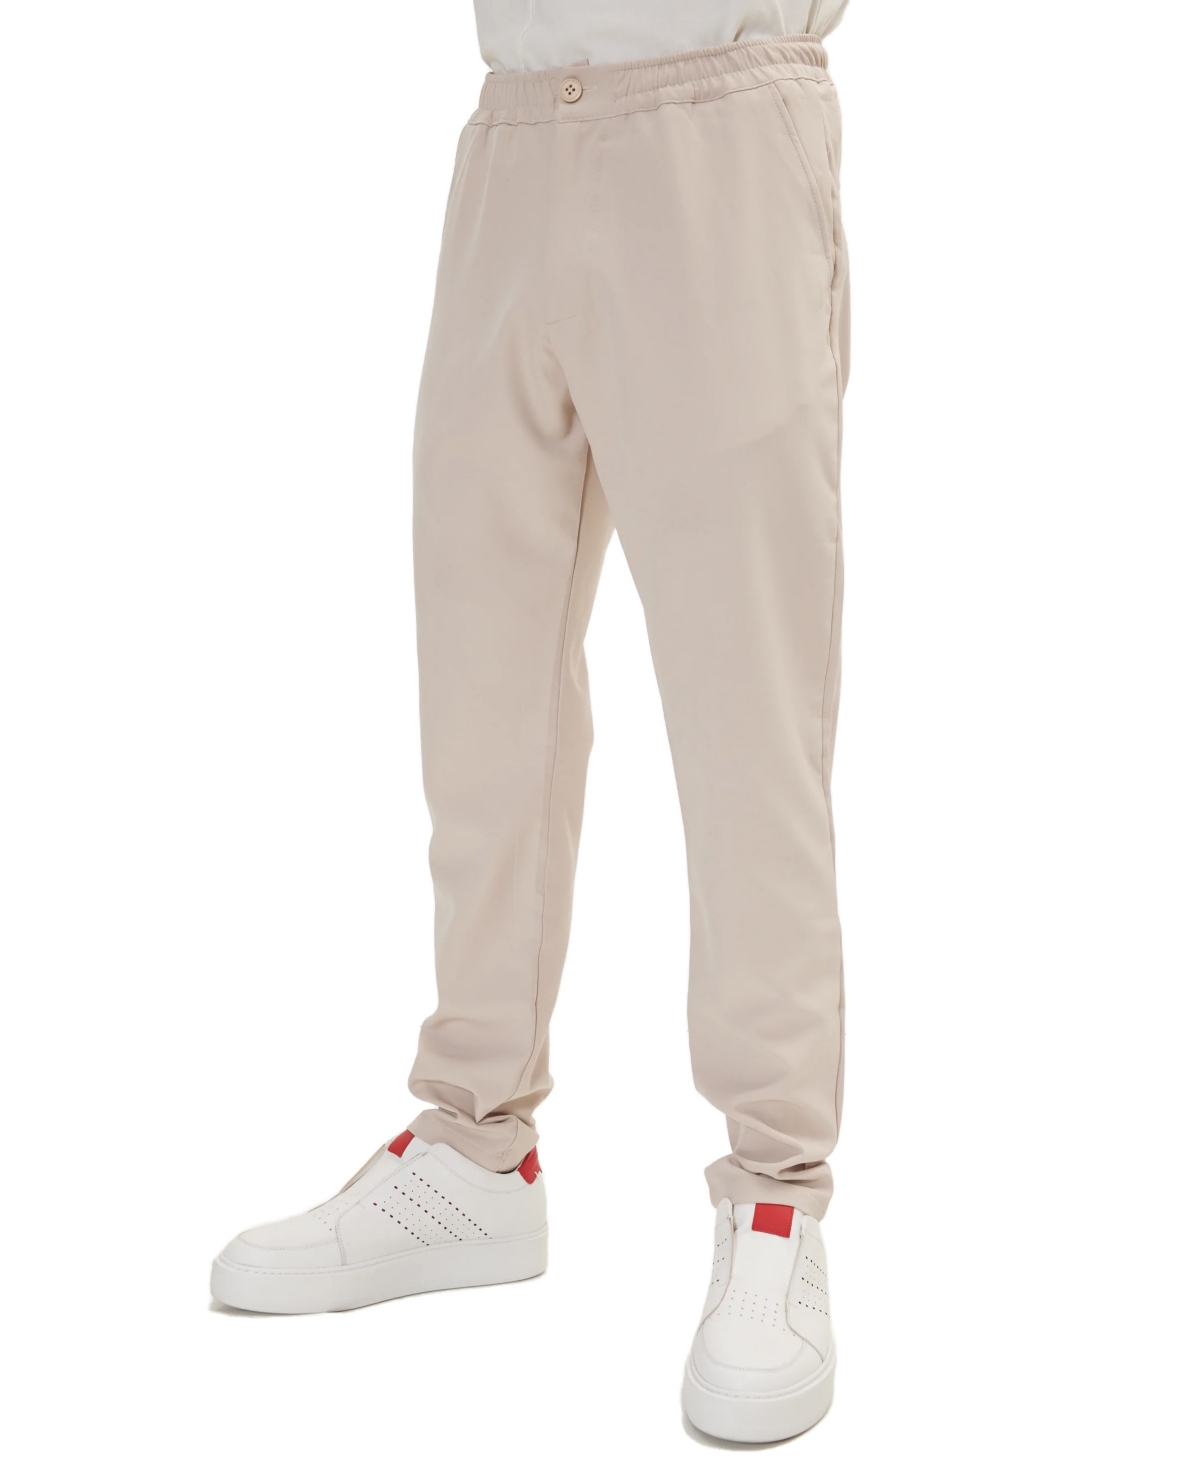 Men's Modern Tapered Joggers Pants - Stone